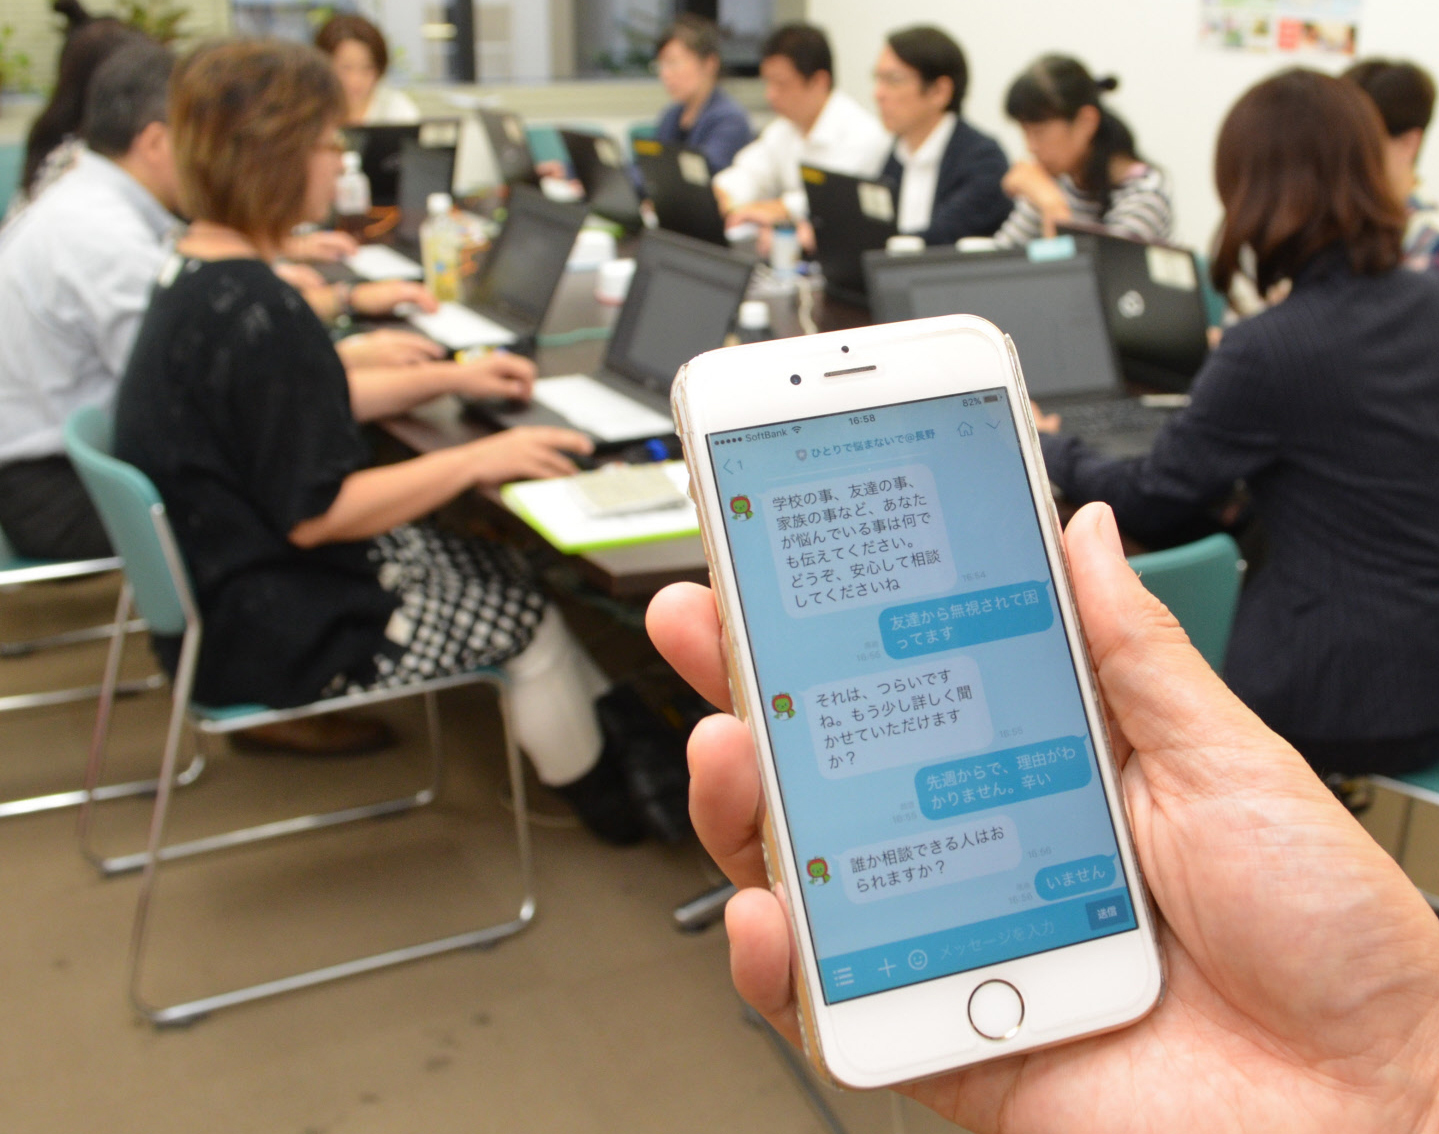 A smartphone screen shows how teenagers can seek consultations with counselors via the Line message app. In the background, counselors respond to them via computers. | CHUNICHI SHIMBUN